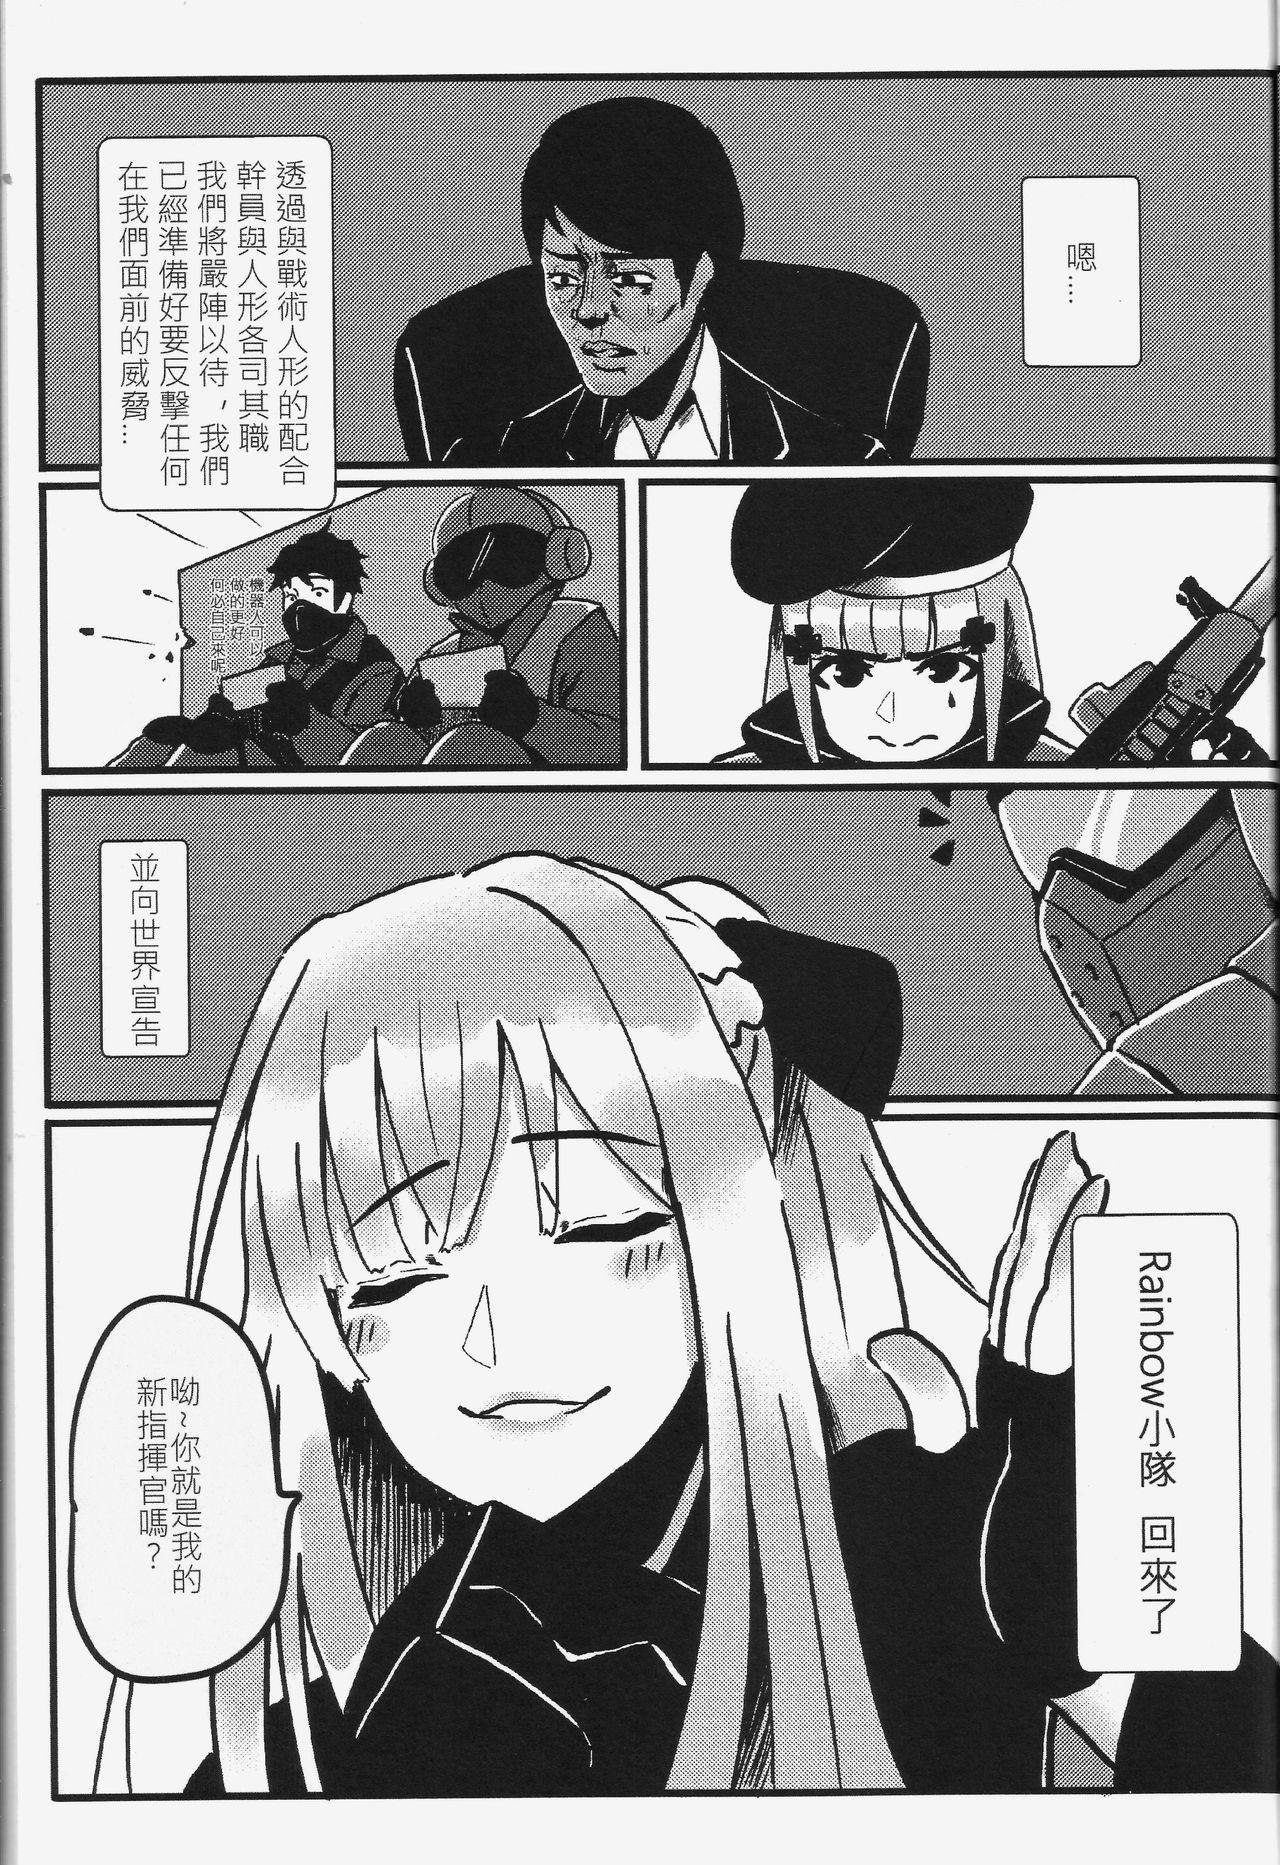 Porn Amateur [FF32][幻獸麒麟] RAINBOW SEX/Girl's Frontline(Girl's Frontline) 恐怖蟑螂公個人分享 - Girls frontline Thick - Page 4